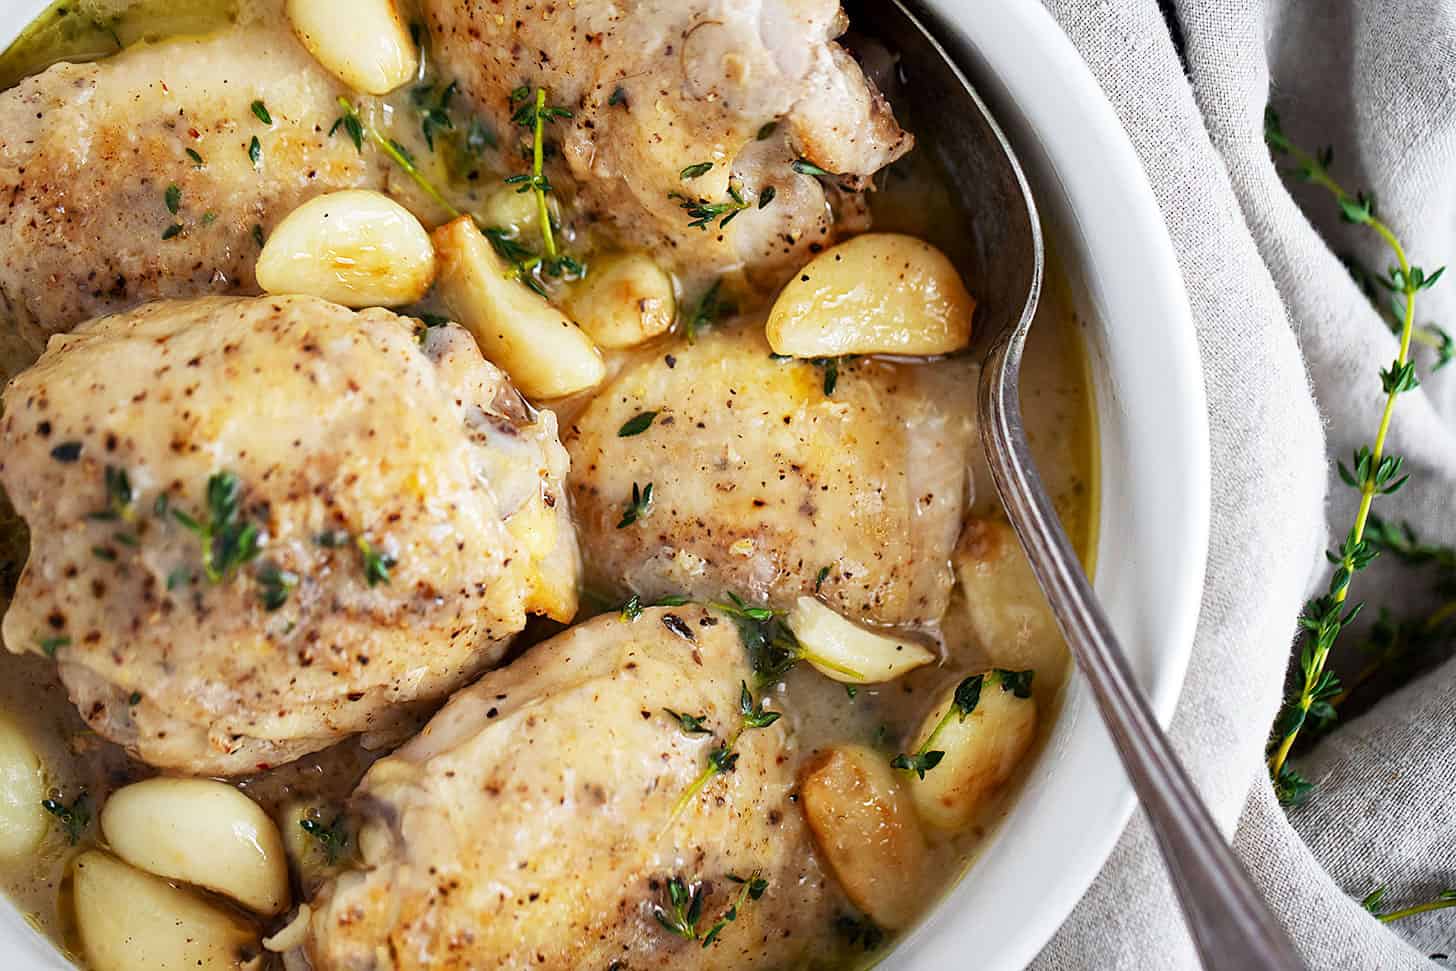 Rustic garlic chicken and gravy in bowl with spoon.